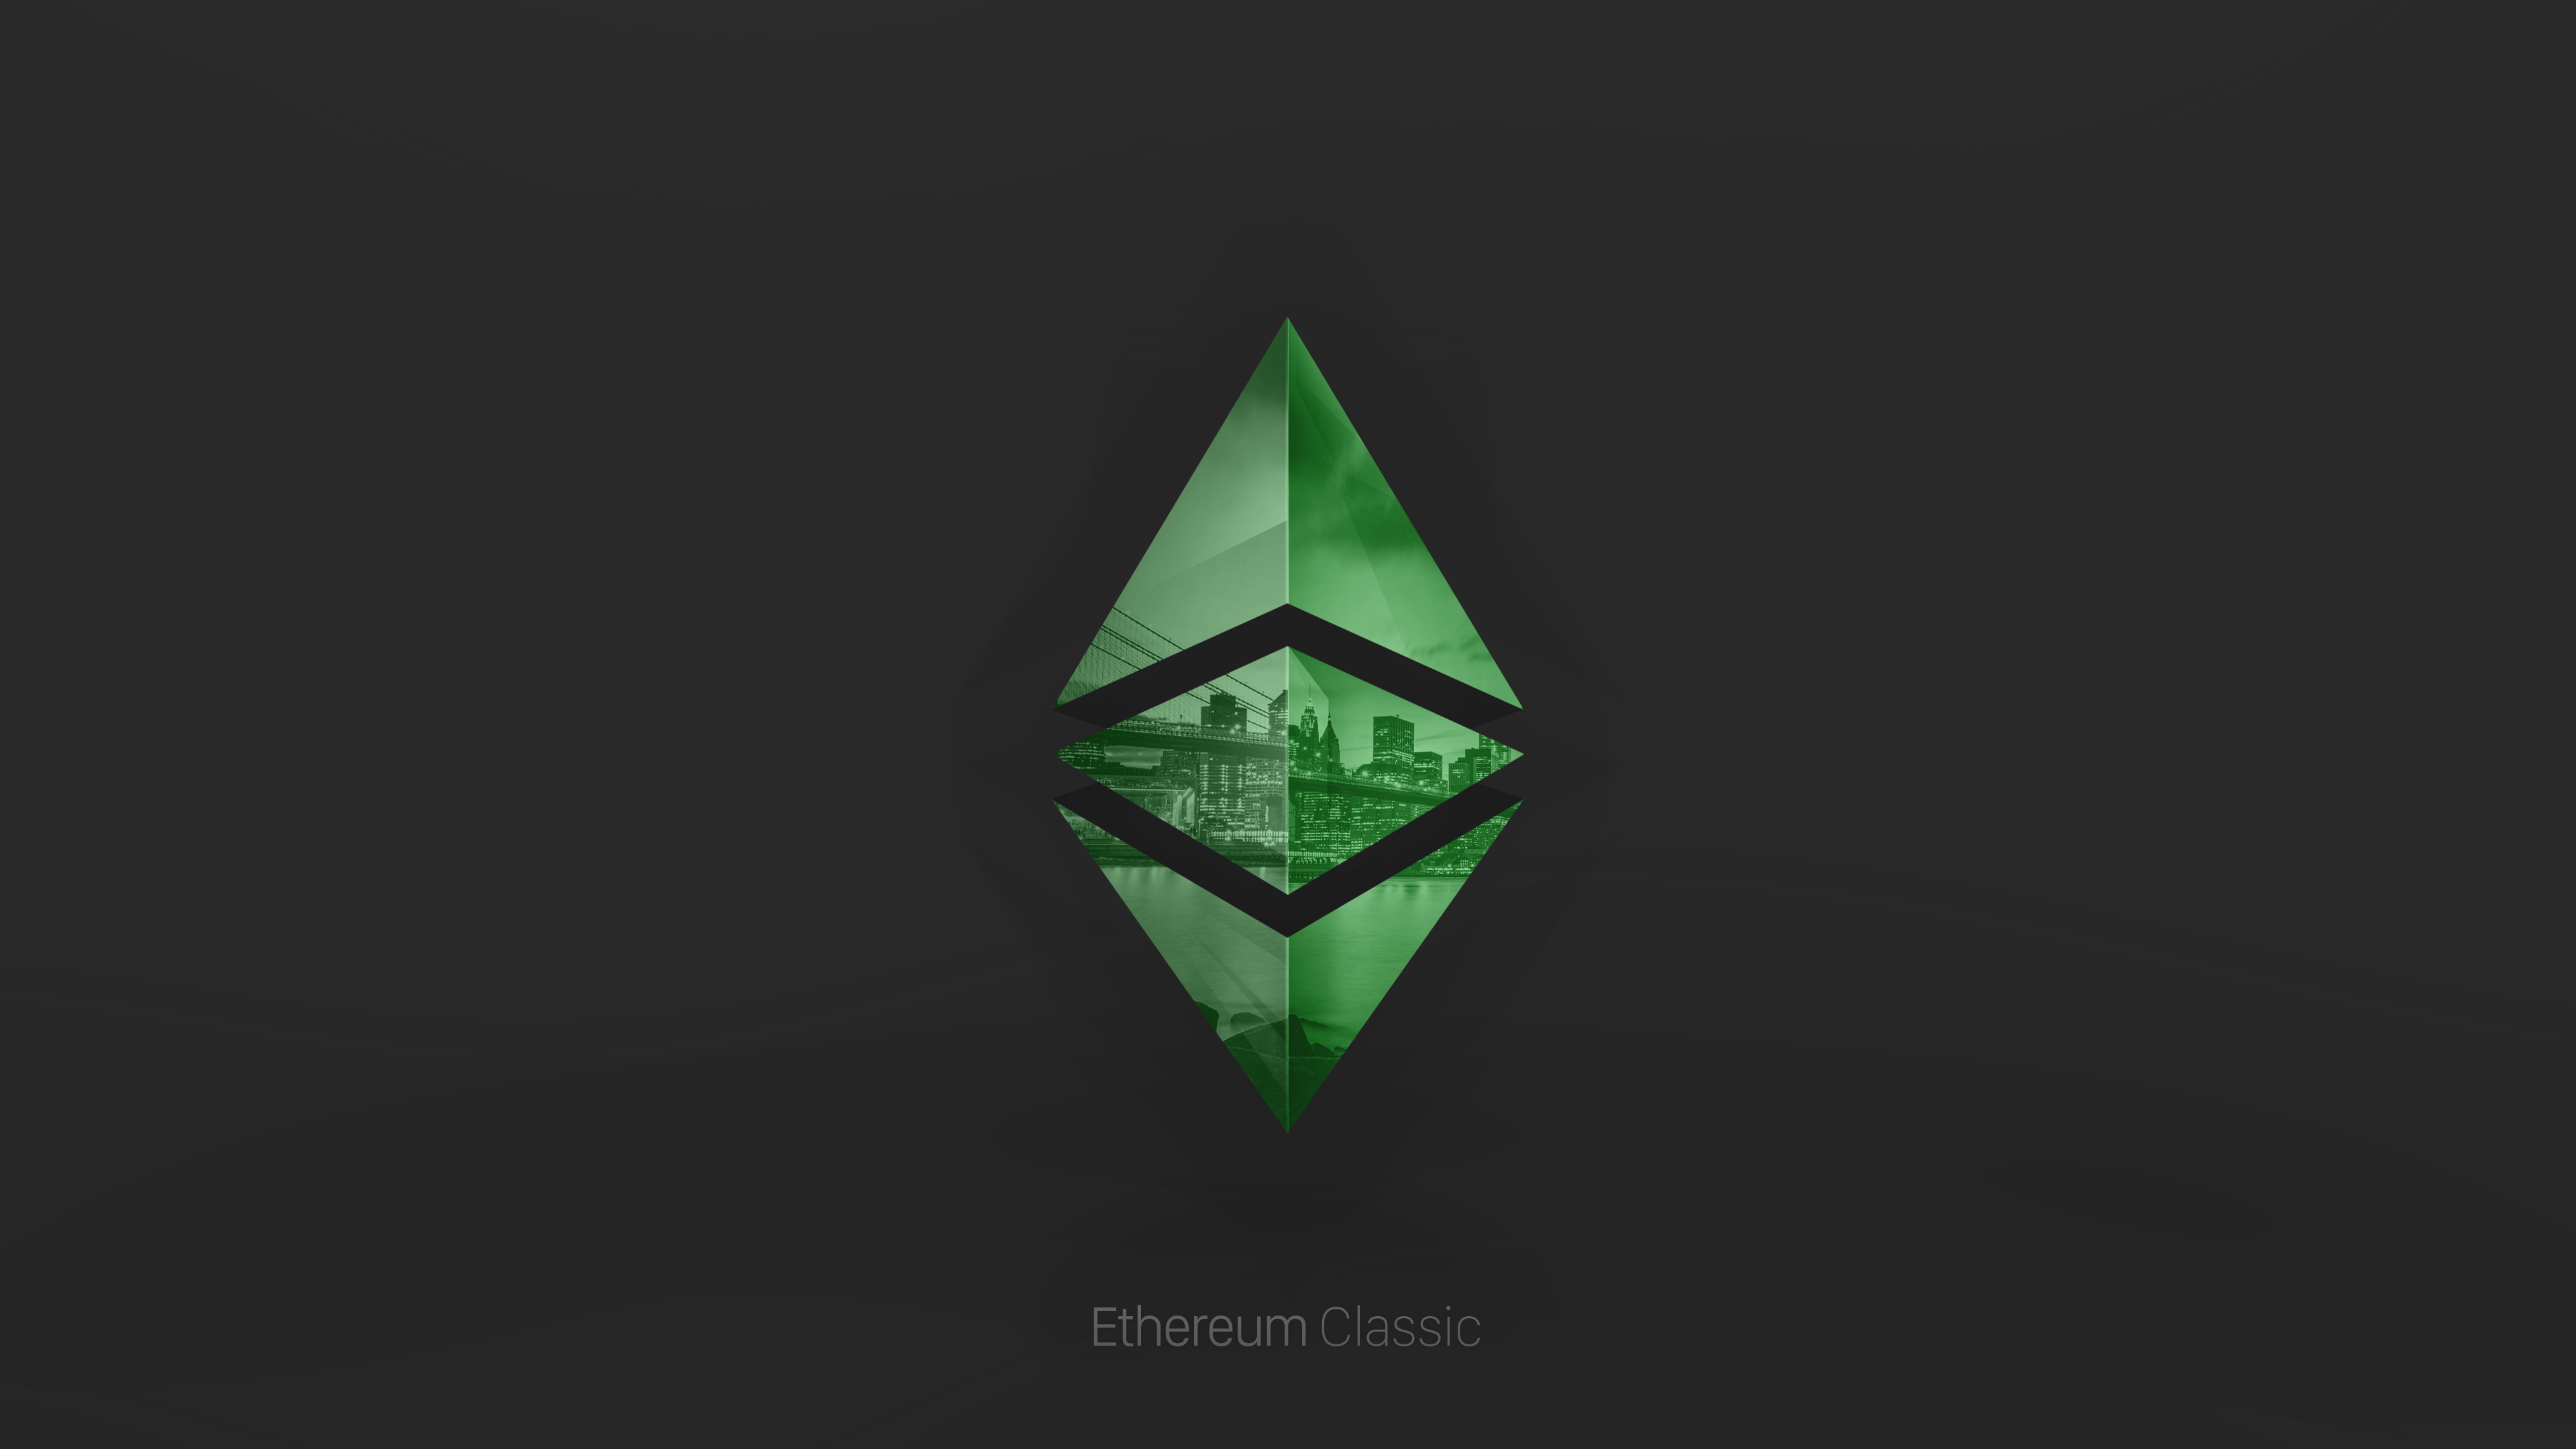 Ethereum Classic Wallpaper [3840x2160] for the longHODLers